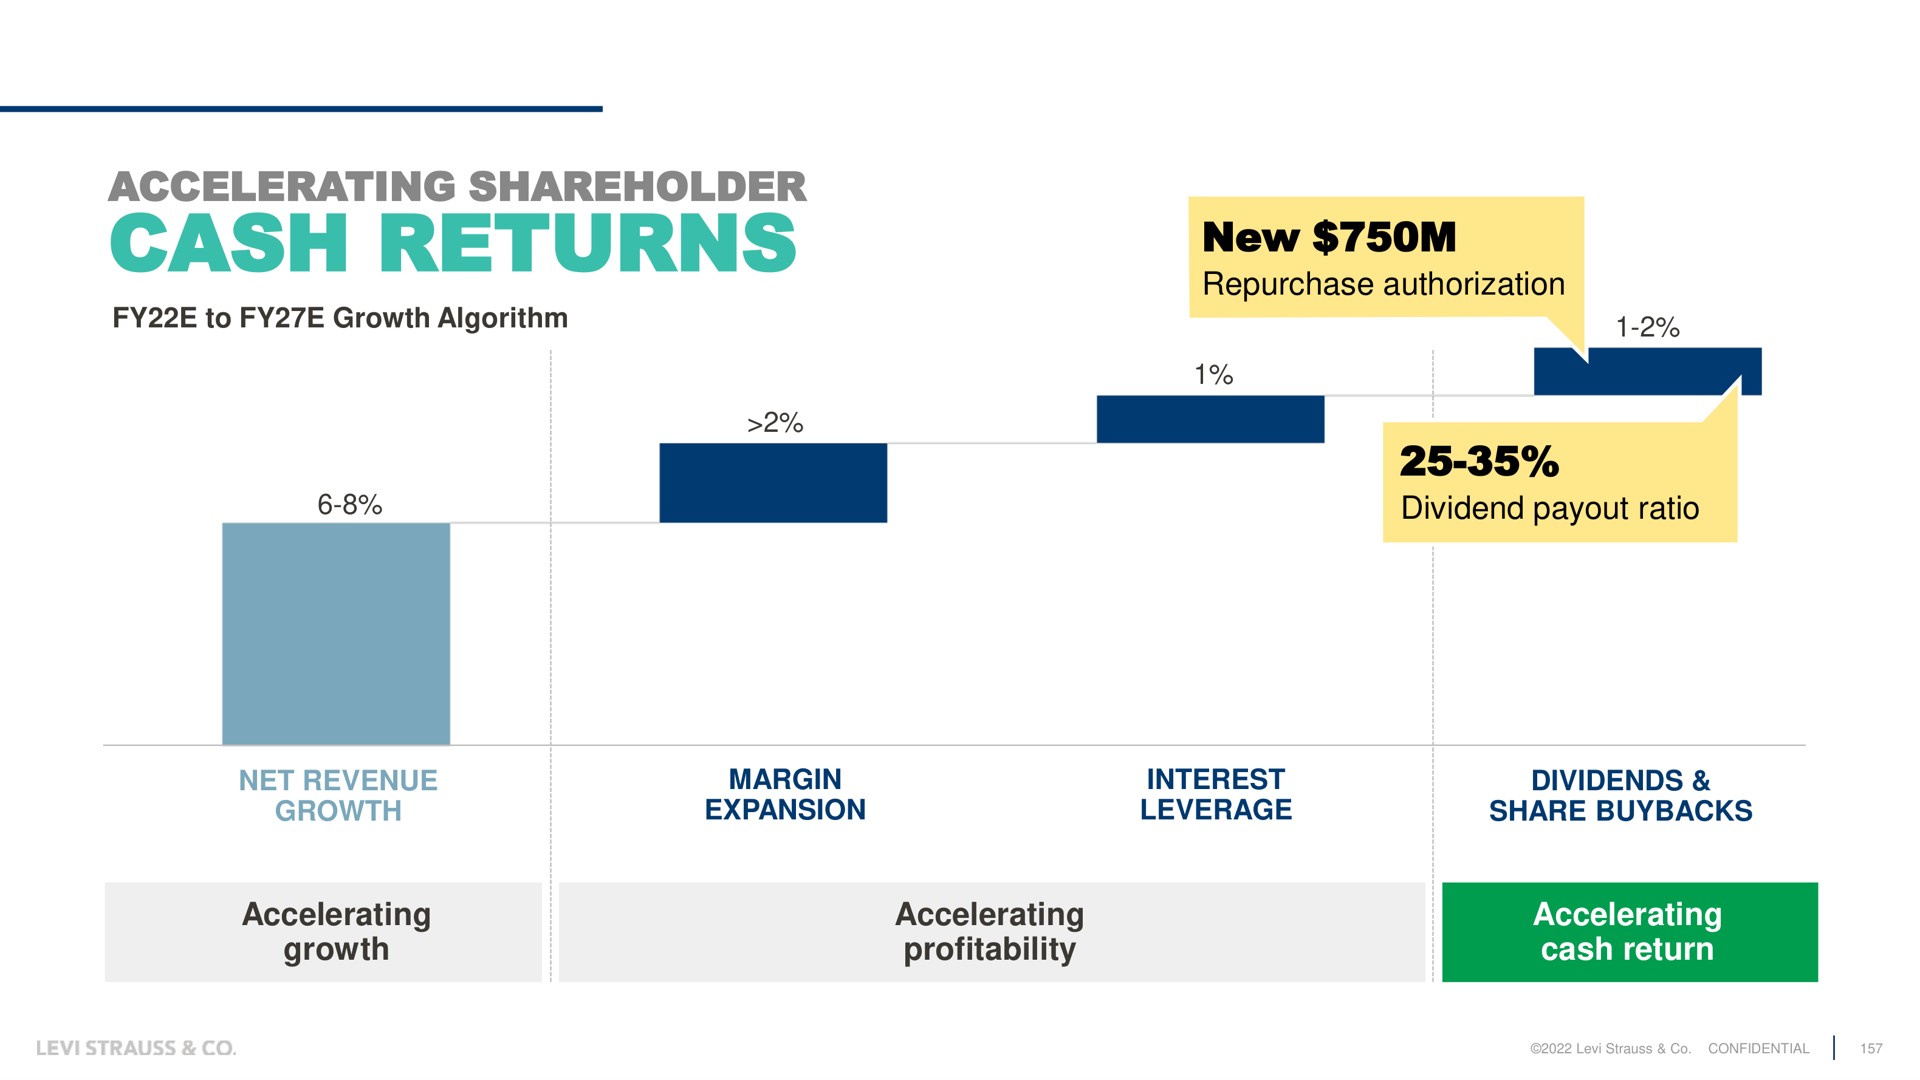 accelerating shareholder cash returns new repurchase authorization died dividend ratio growth profitability return | Levi Strauss